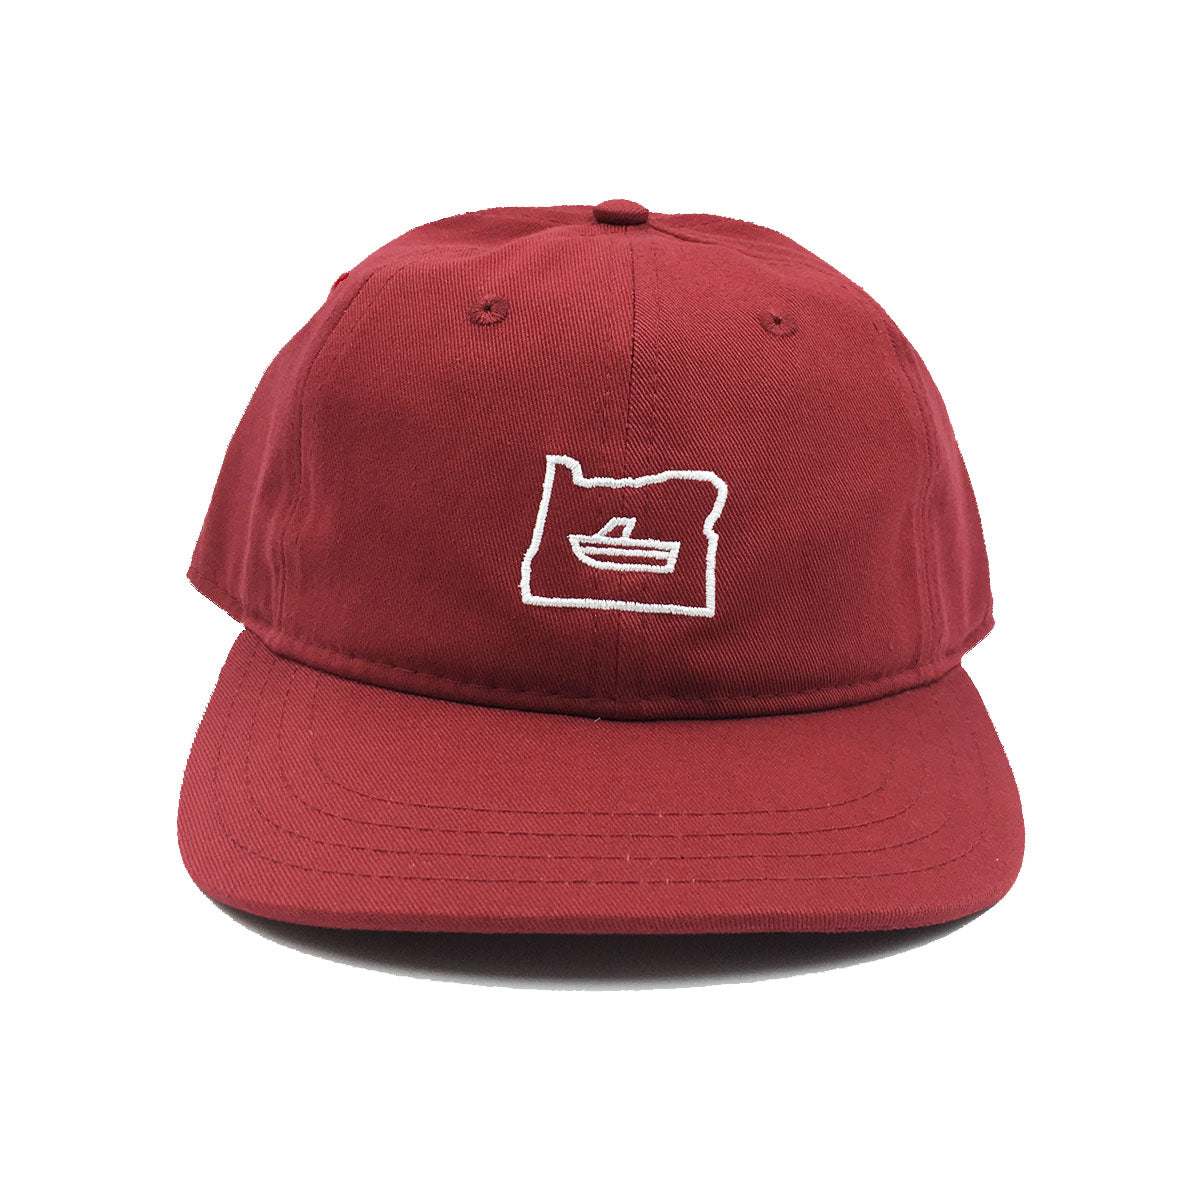 AWS Oregon Boater's Cap - Red